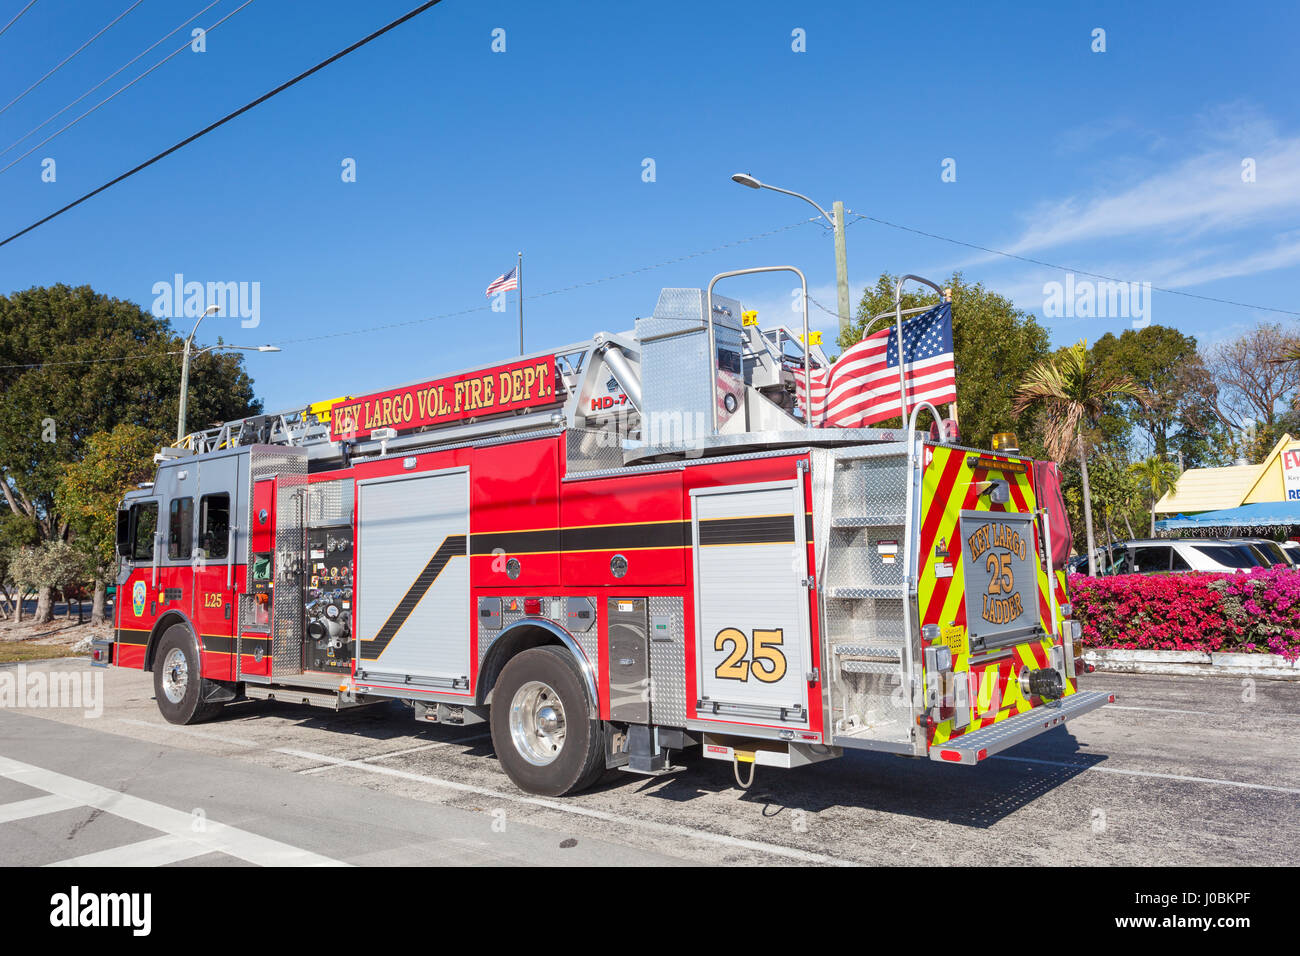 Key Largo, Fl, USA - March 16, 2017: Fire engine of the Key Largo fire department parked on on the side of the road. Florida, United States Stock Photo